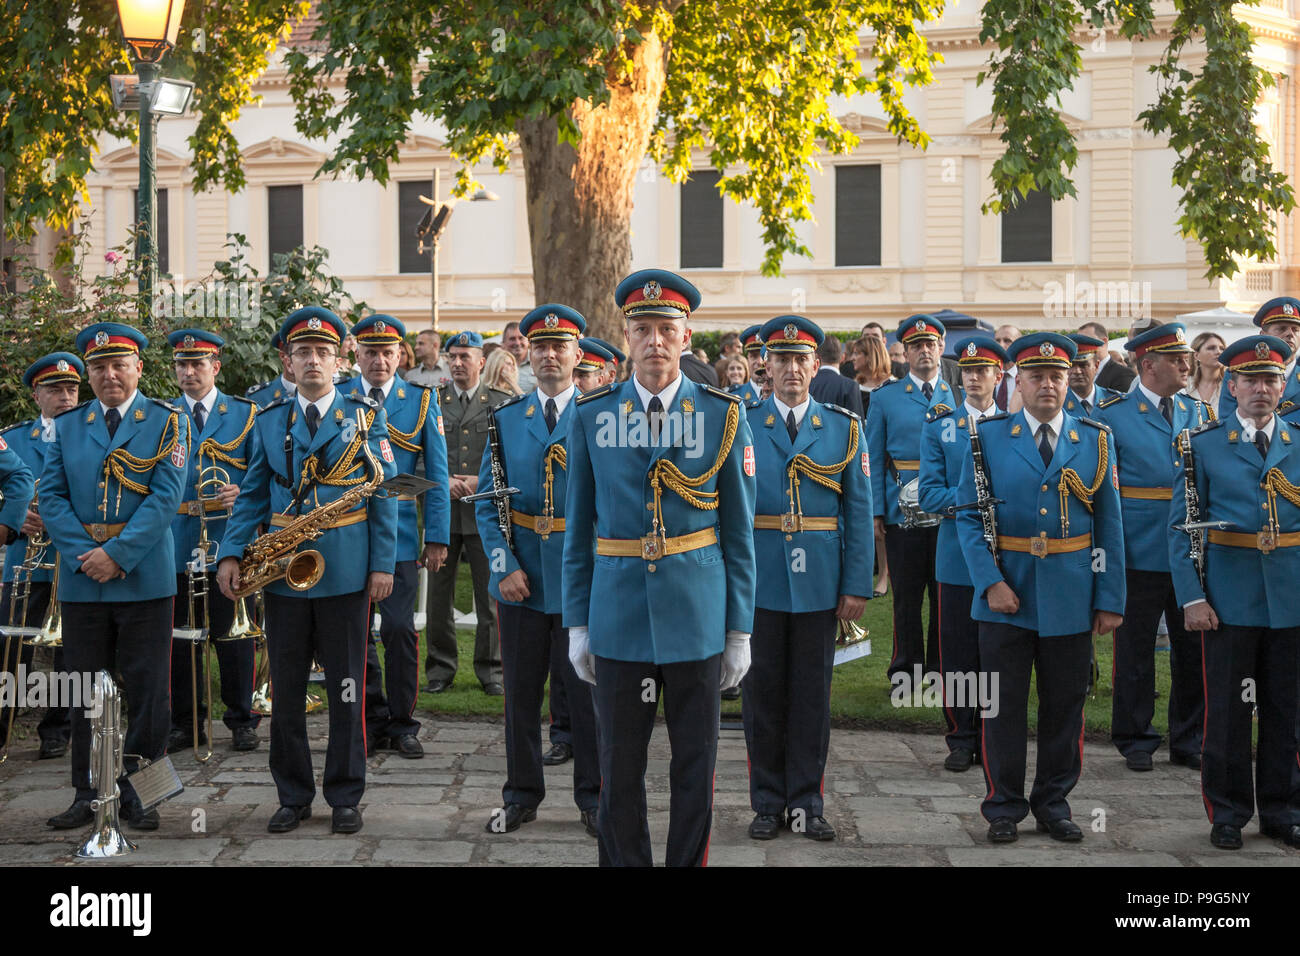 BELGRADE, SERBIA - JULY 14, 2018: Serbian Army Band in formal uniform and position waiting to perform during a ceremony in the Belgrade French Embassy Stock Photo